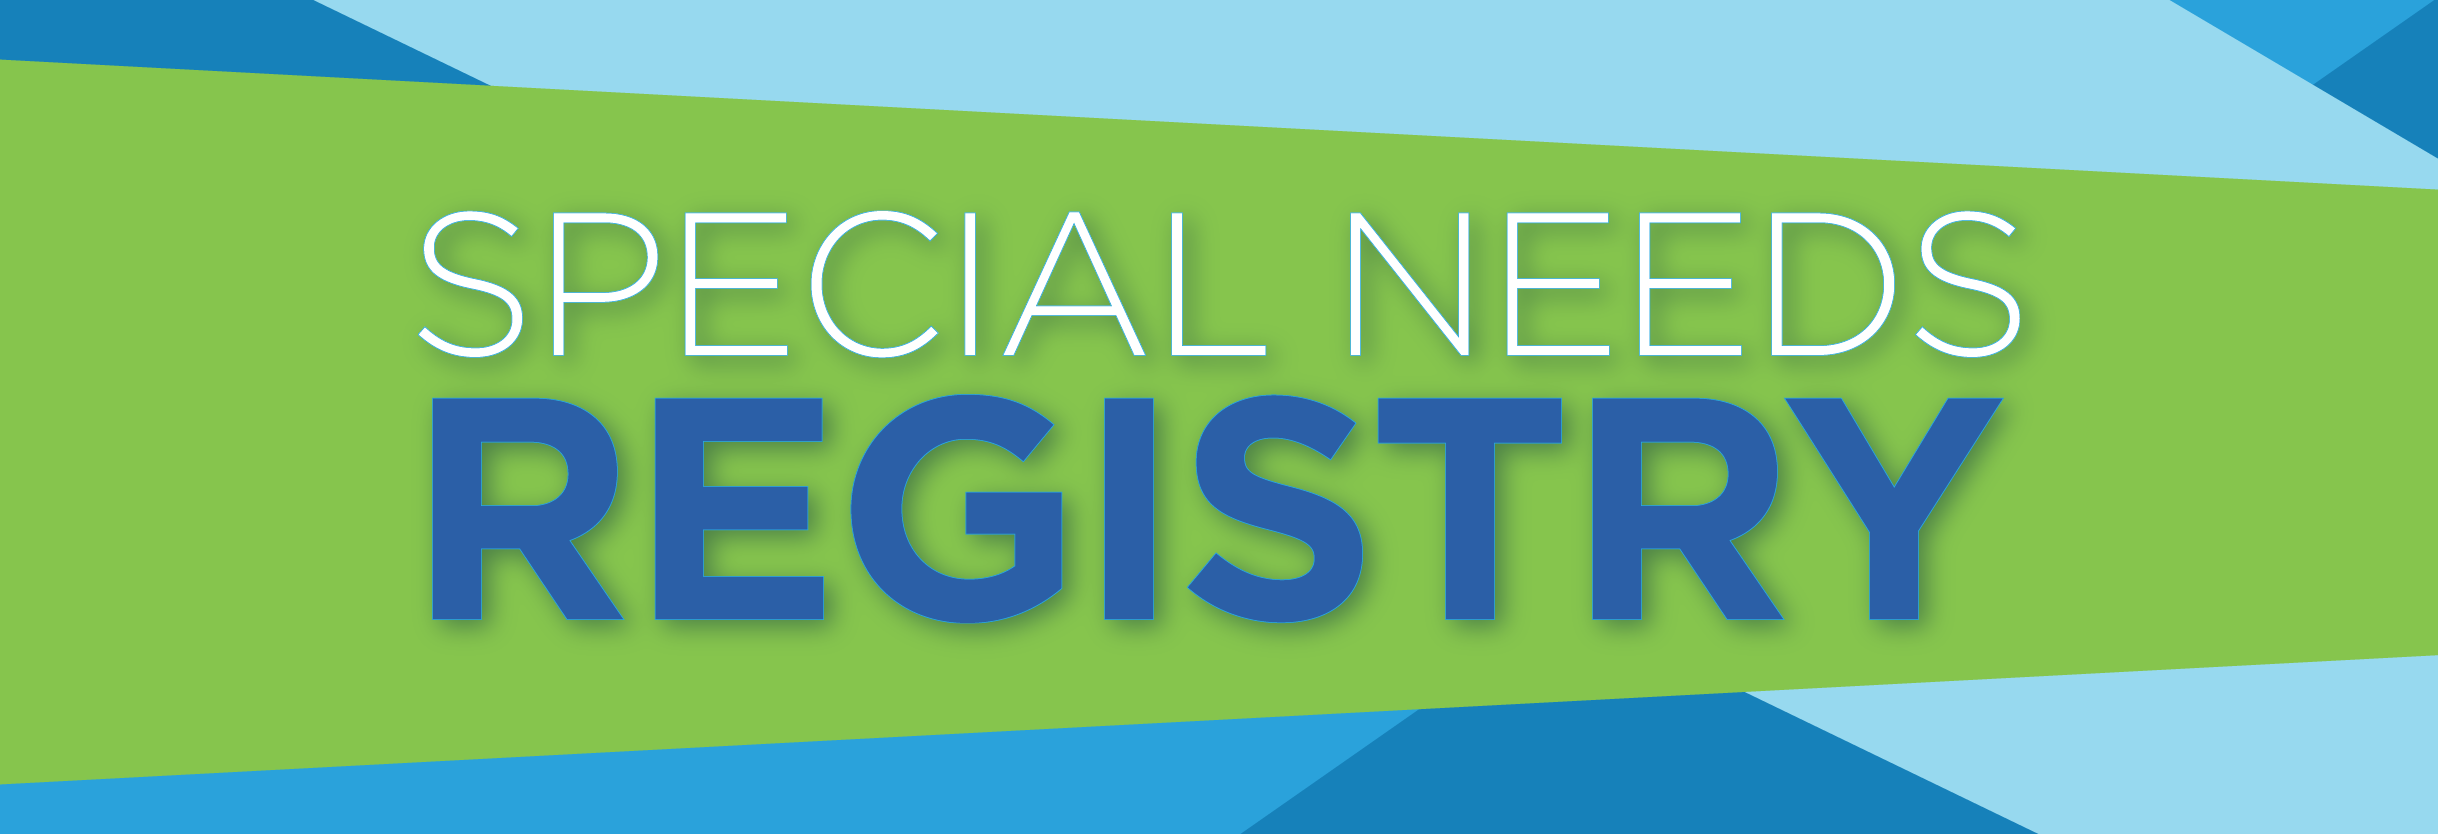 SECO News May 2020 Special Needs Registry Banner